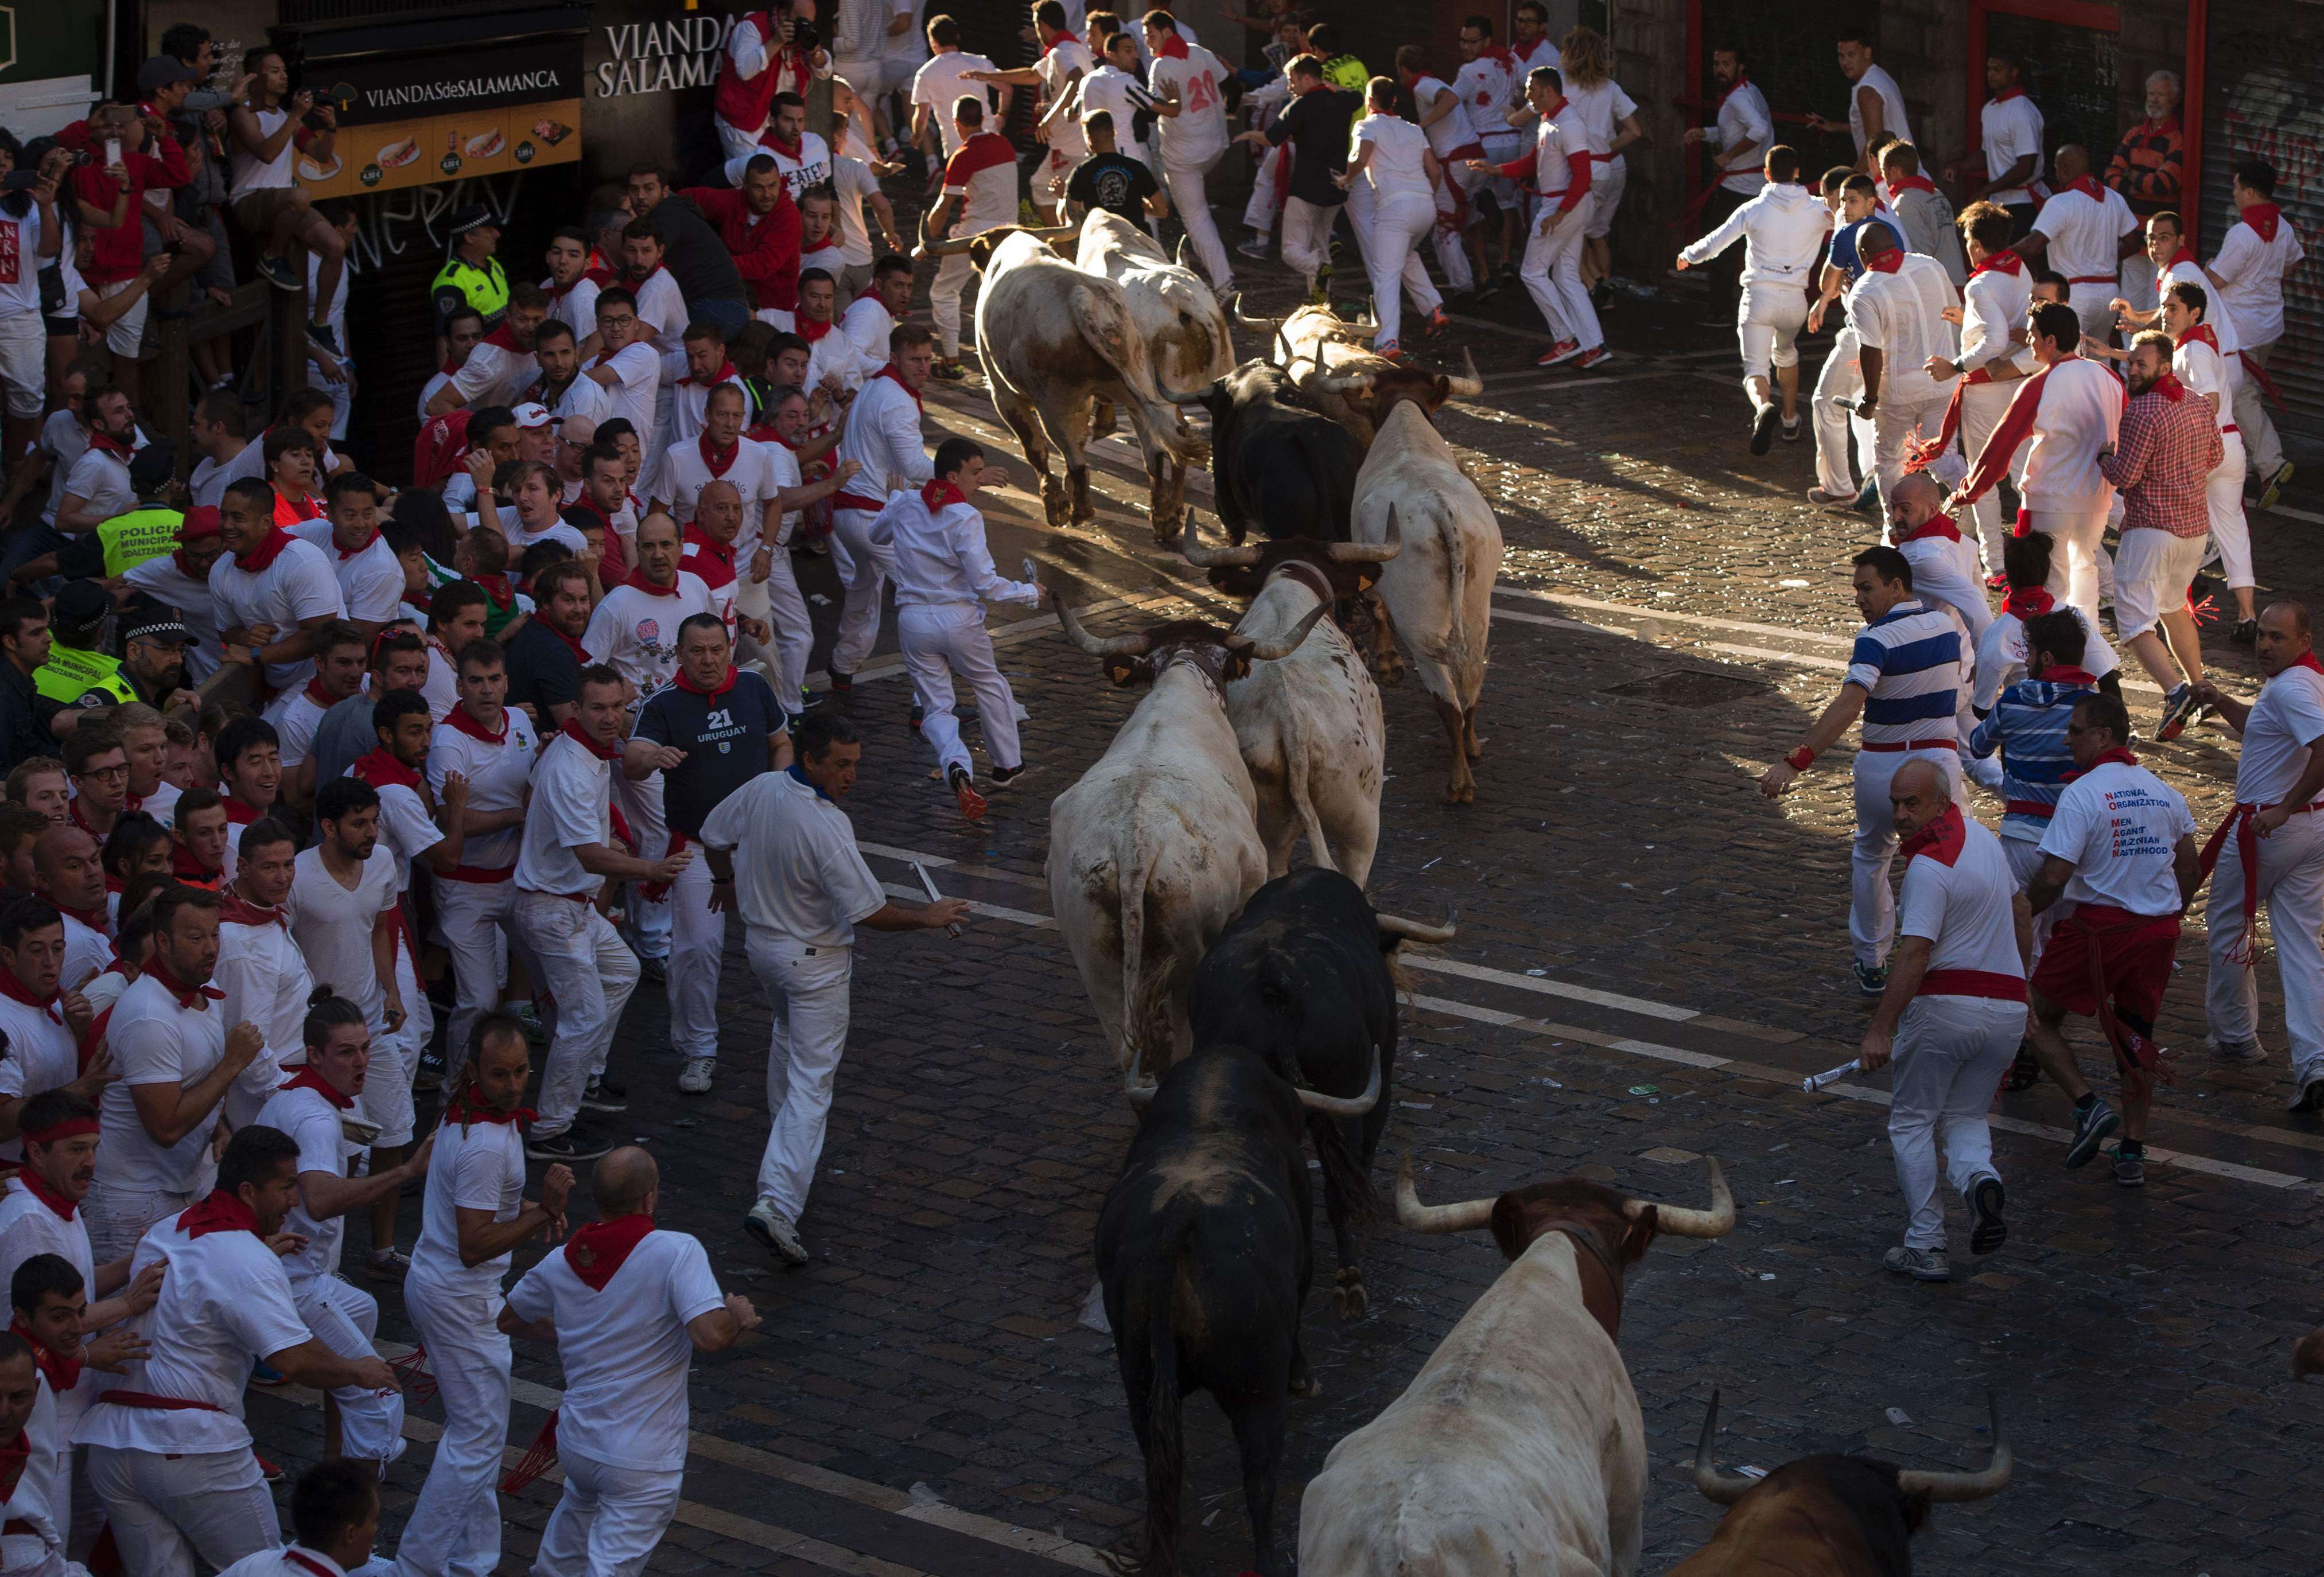 Participants run ahead of Fuente Ymbro fighting bulls on the first day of the San Fermin bull run on July 7, 2016, in Pamplona, northern Spain.  On each day of the festival six bulls are released at 8:00 a.m. (0600 GMT) to run from their corral through the narrow, cobbled streets of the old town over an 850-meter (yard) course. Ahead of them are the runners, who try to stay close to the bulls without falling over or being gored. / AFP PHOTO / MIGUEL RIOPA